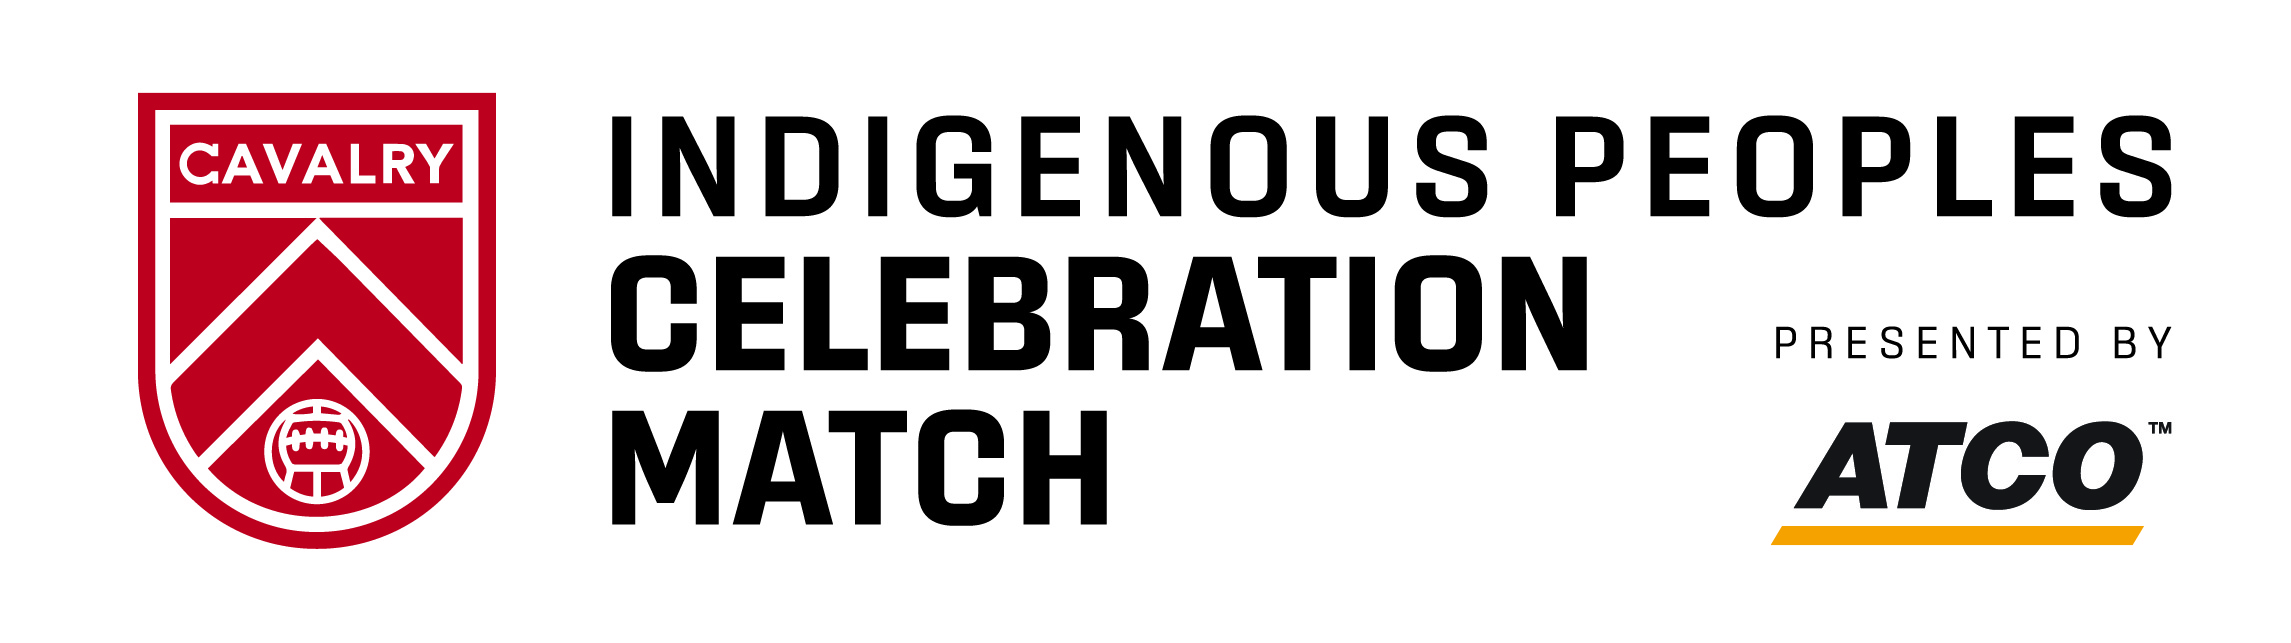 Cavalry FC Indigenous Peoples Celebration Match, presented by ATCO